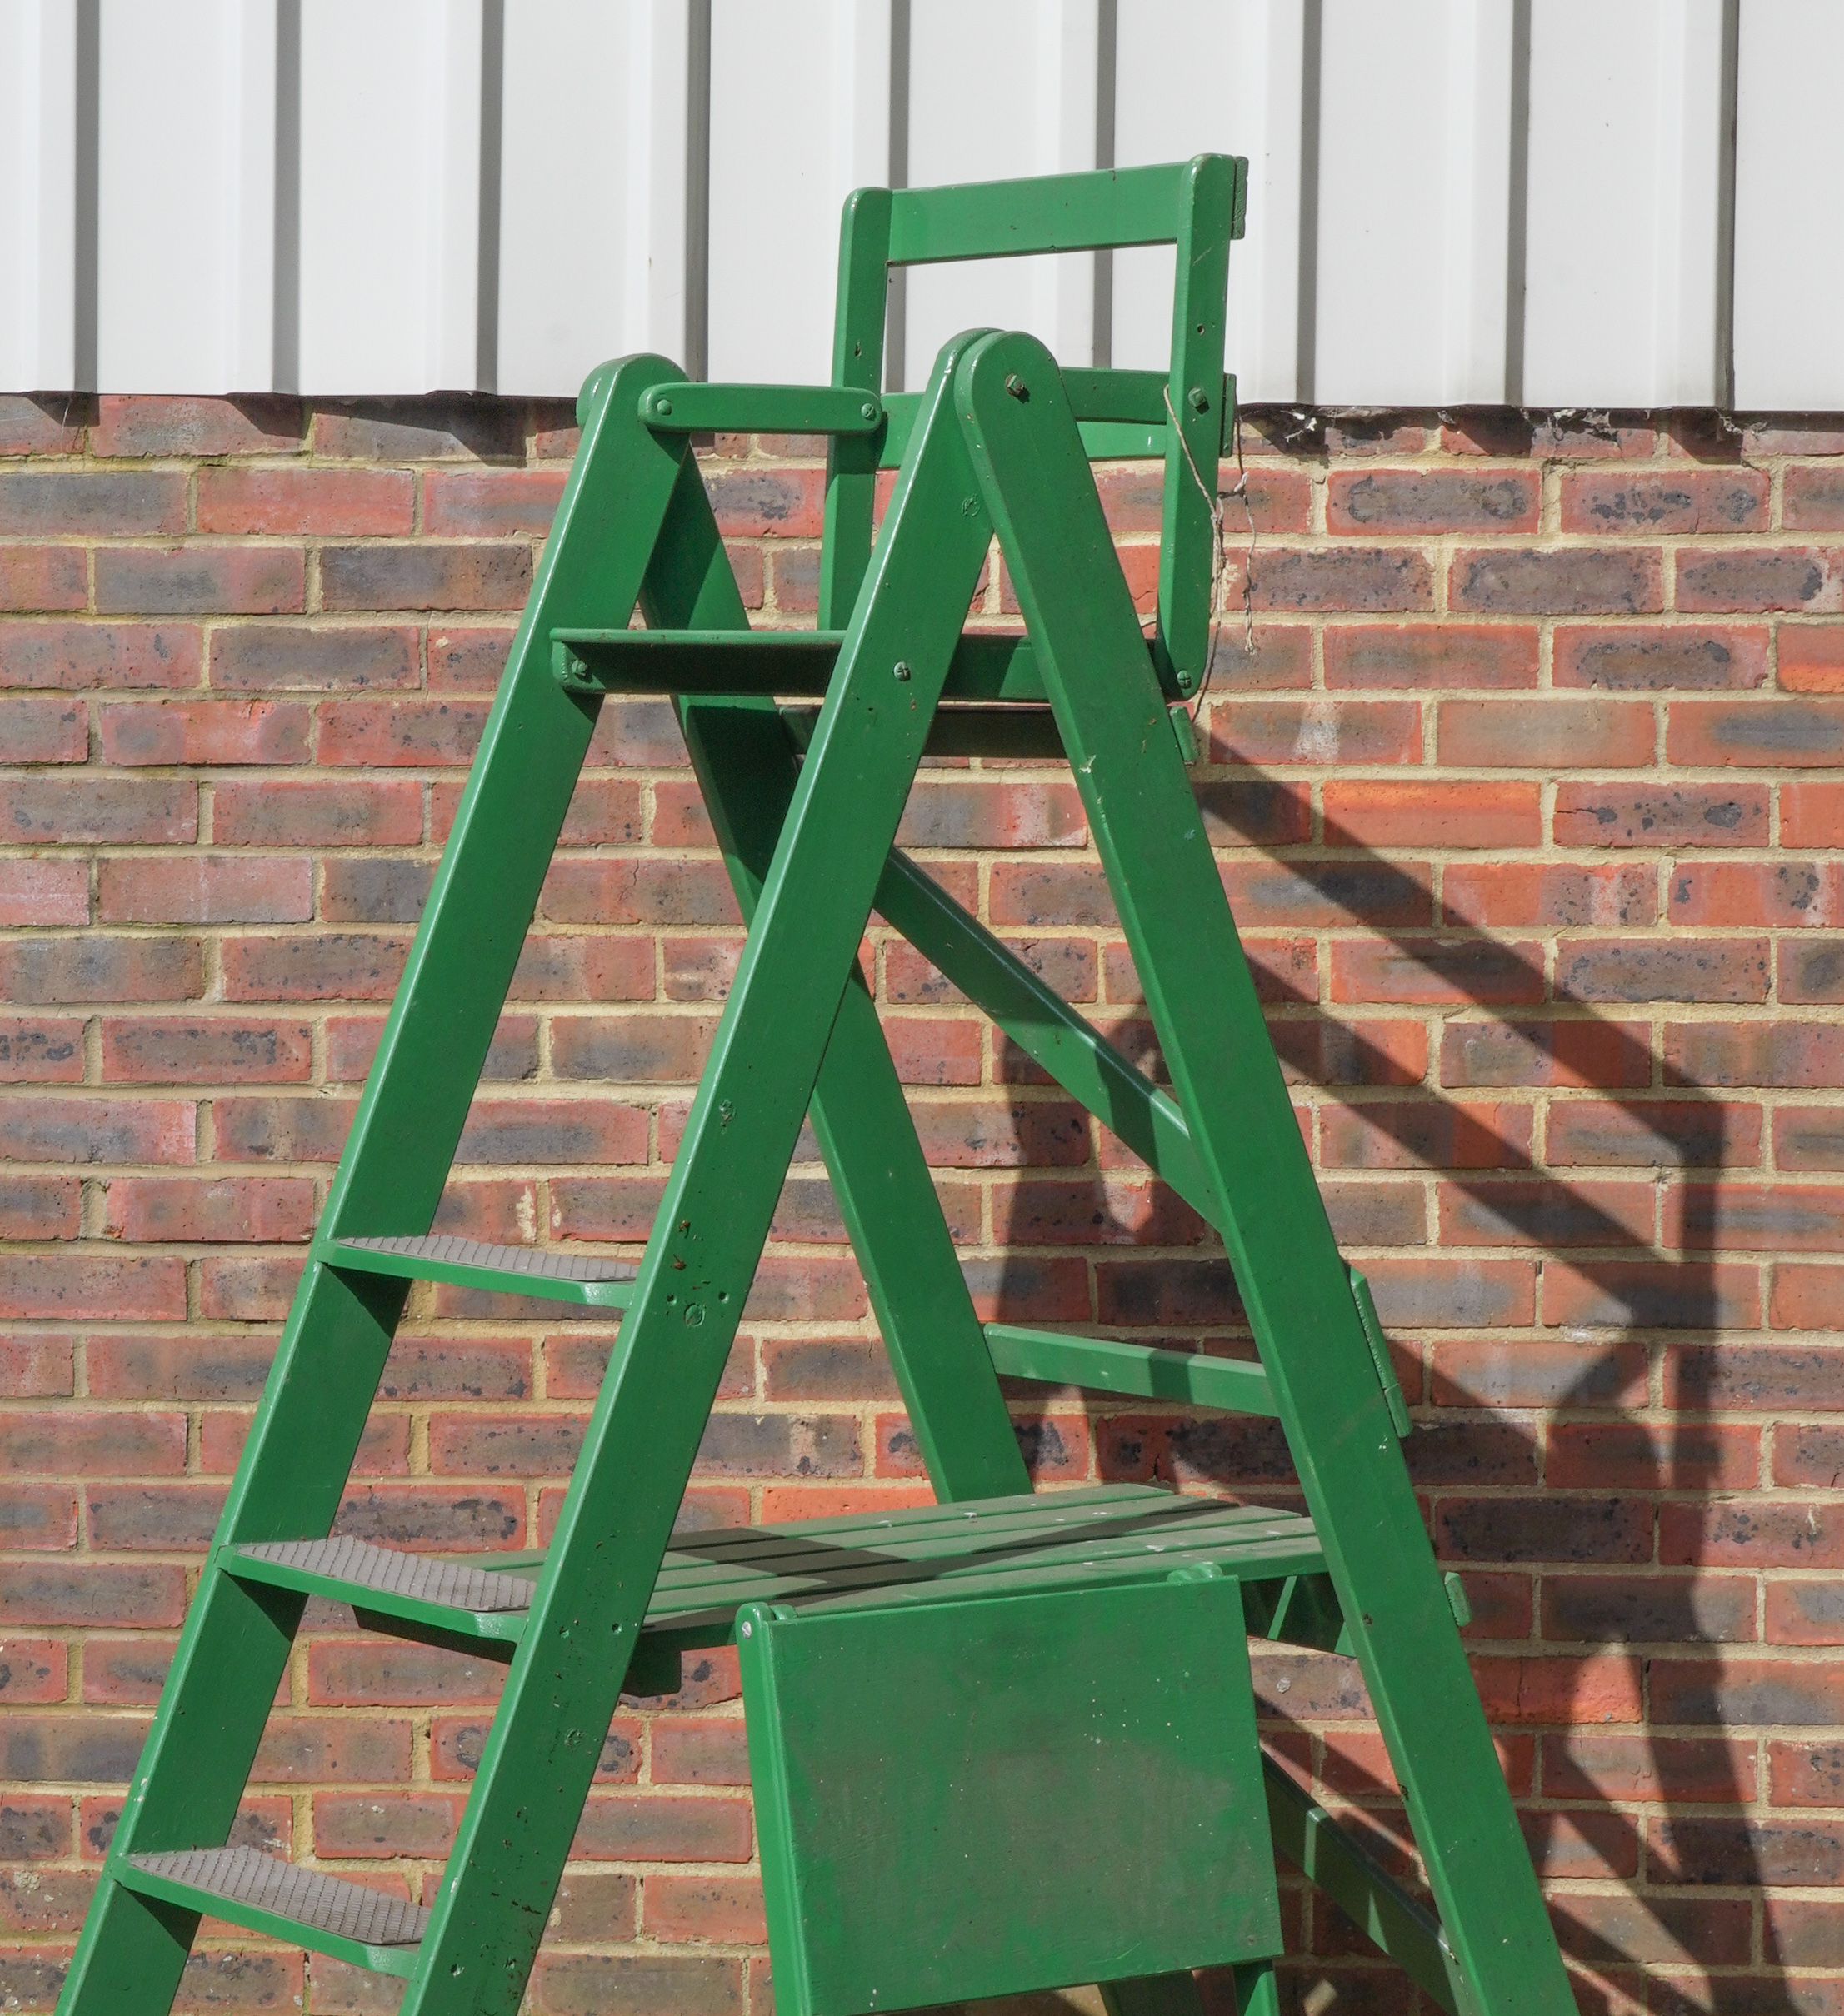 A GREEN PAINTED A-FRAME TENNIS UMPIRE CHAIR - Image 2 of 3